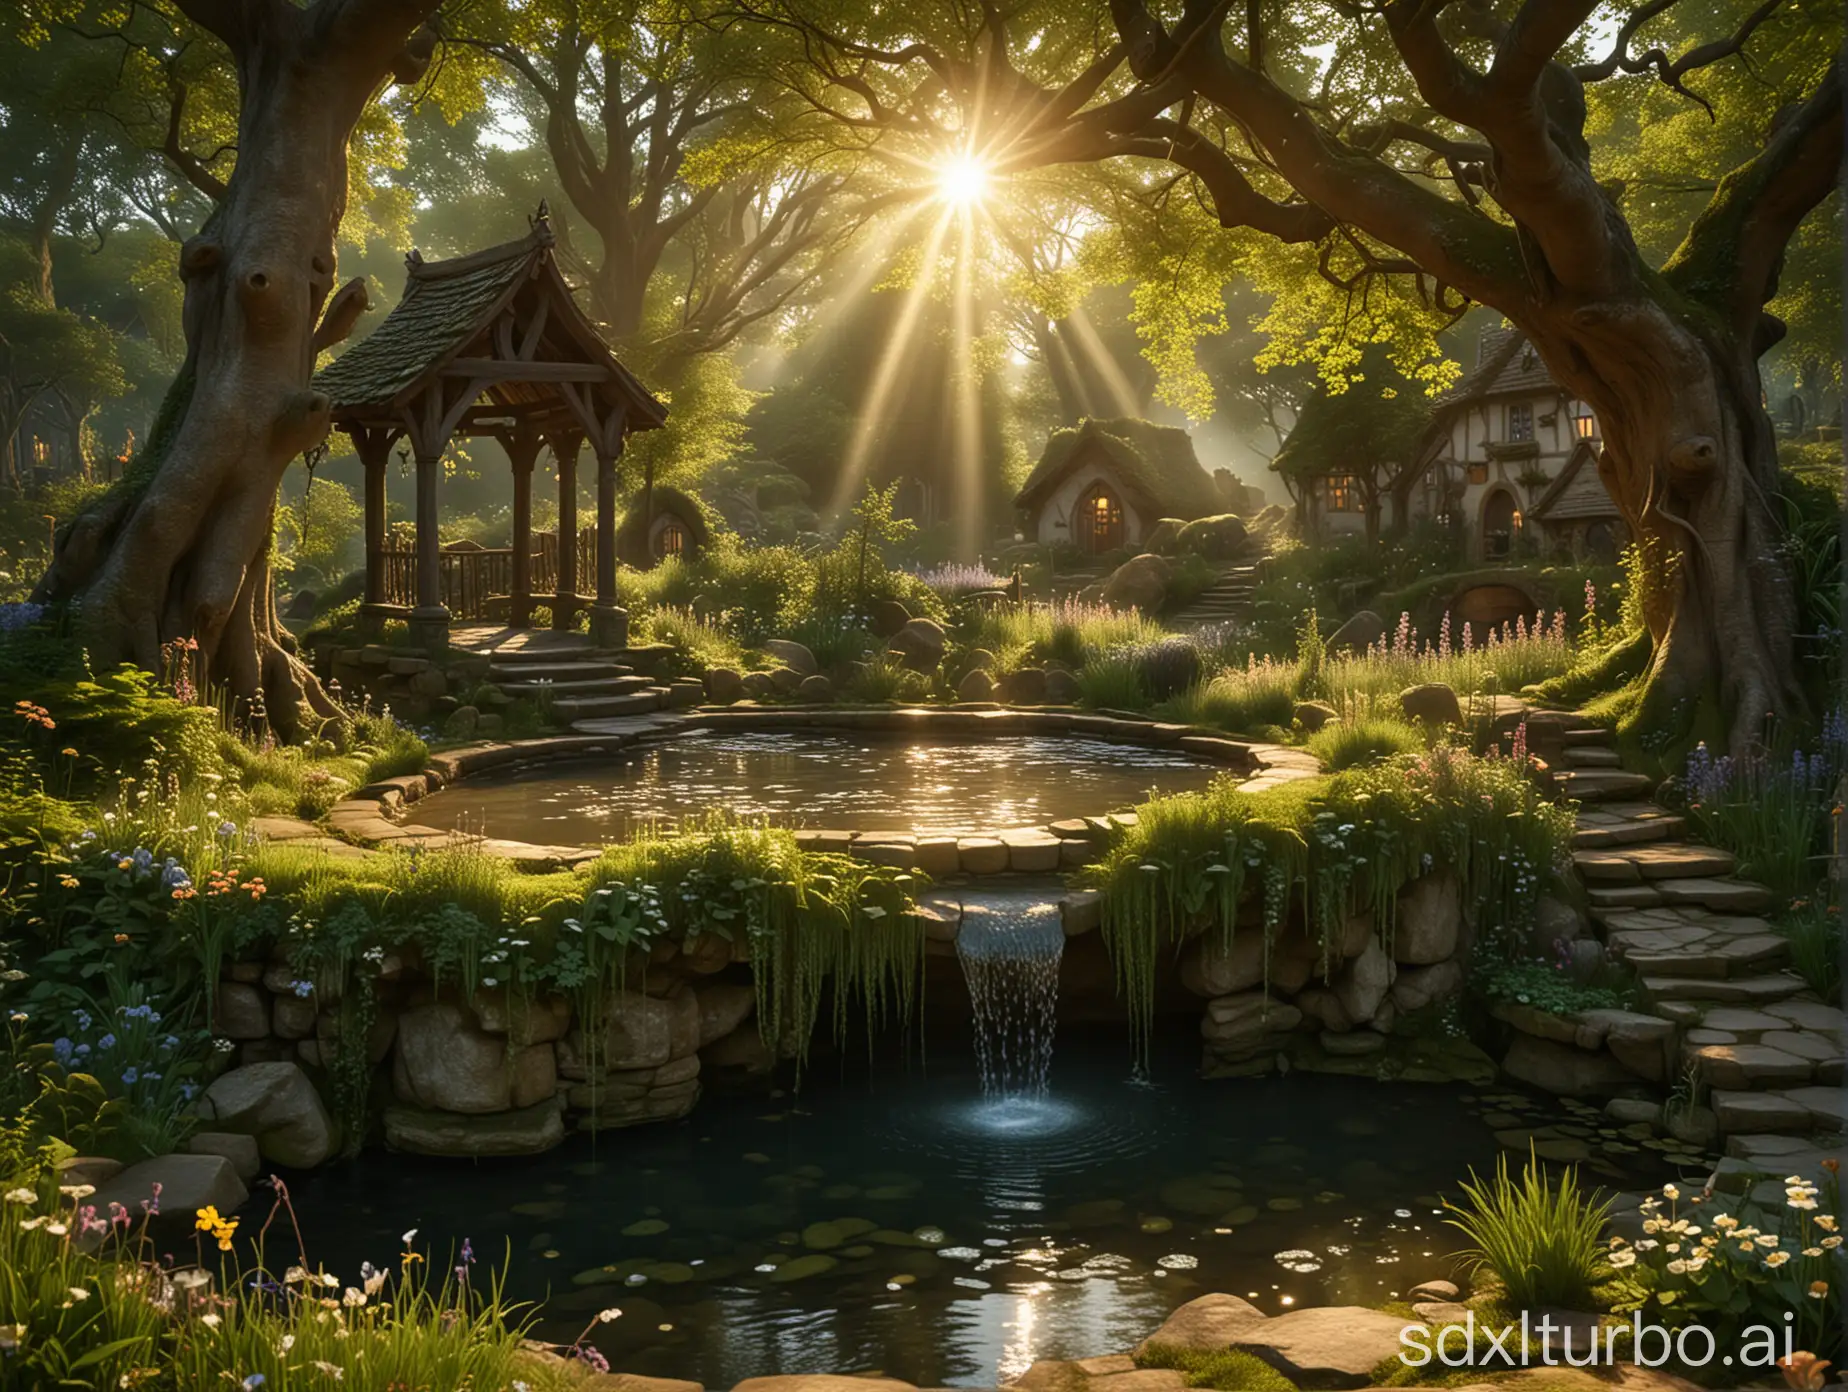 An enchanted well lies at the heart of Ethelain, illuminating the land with its radiant light. Surrounded by rebuilt homes and lush forests through which magical creatures move, Ultra HD